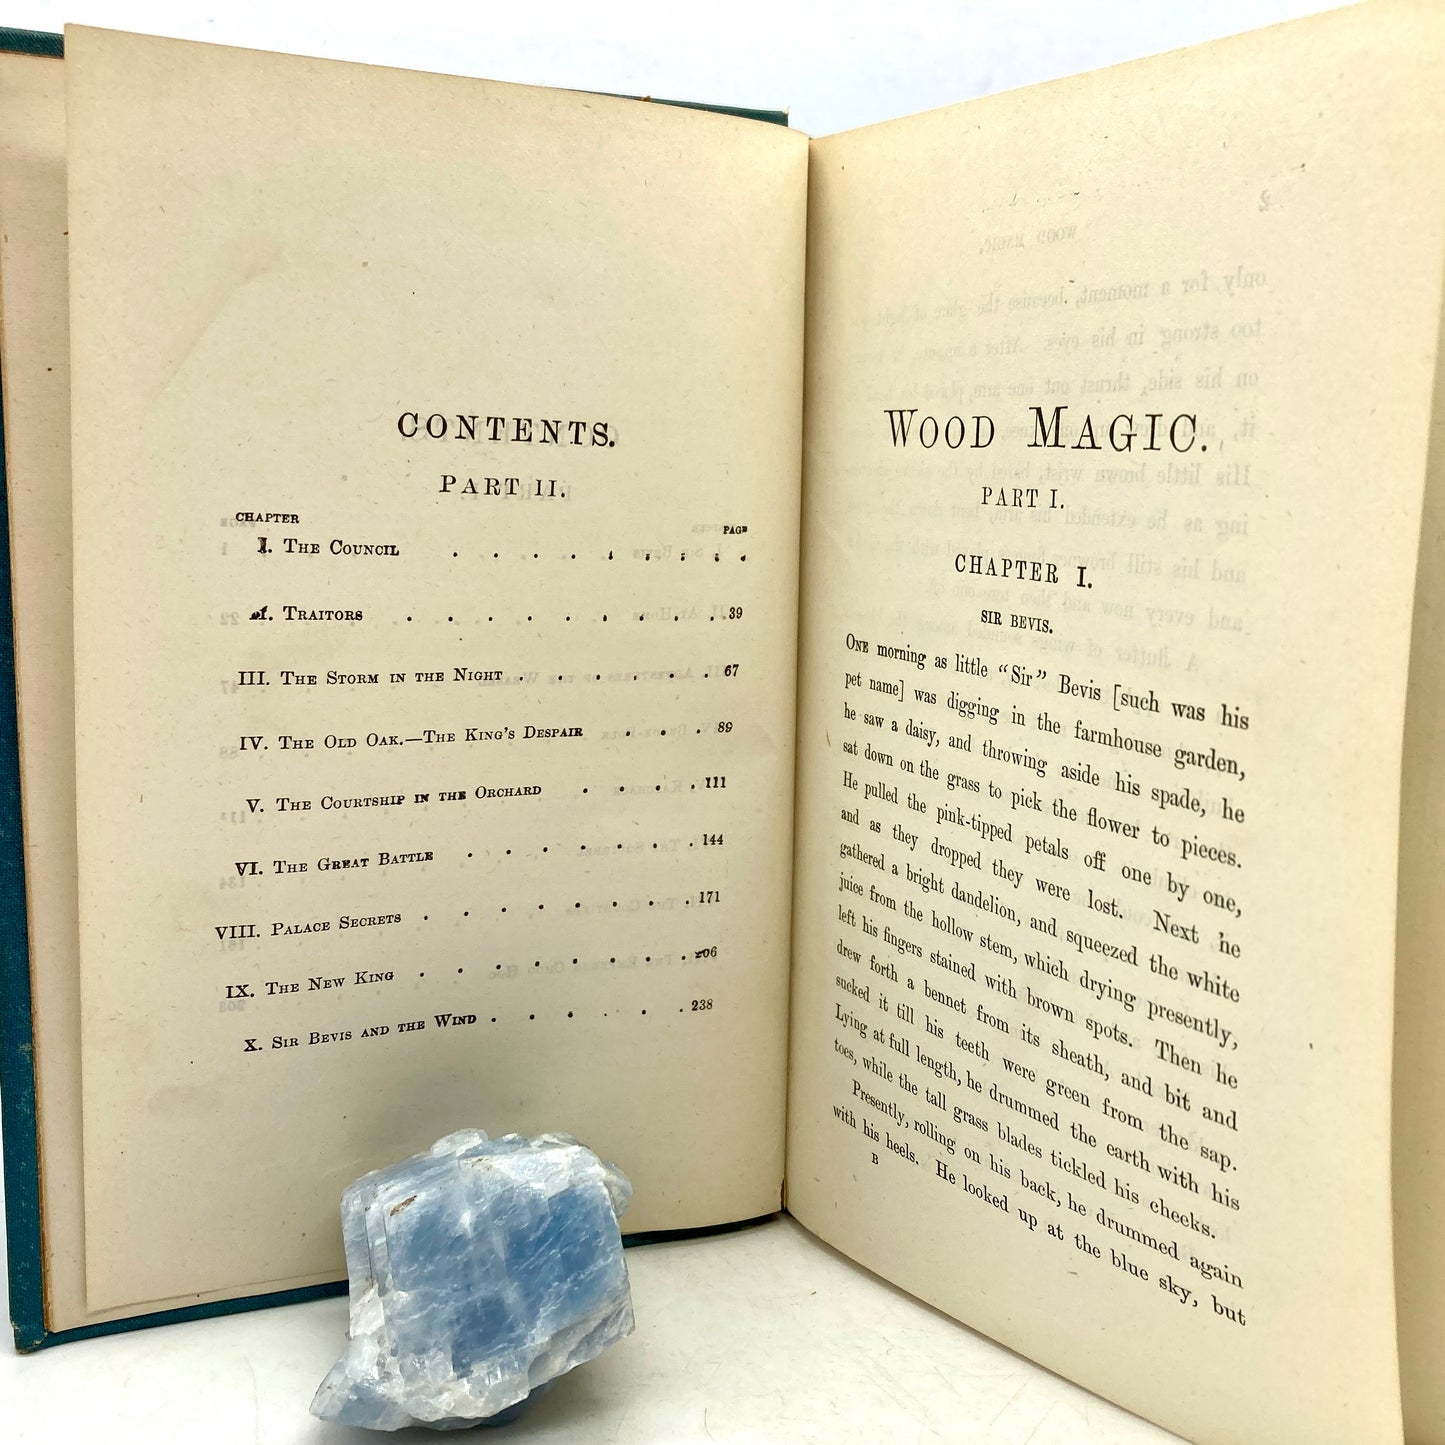 JEFFERIES, Richard "Wood Magic, A Fable" [Cassell, Petter, Galpin & Co, n.d./c1878]